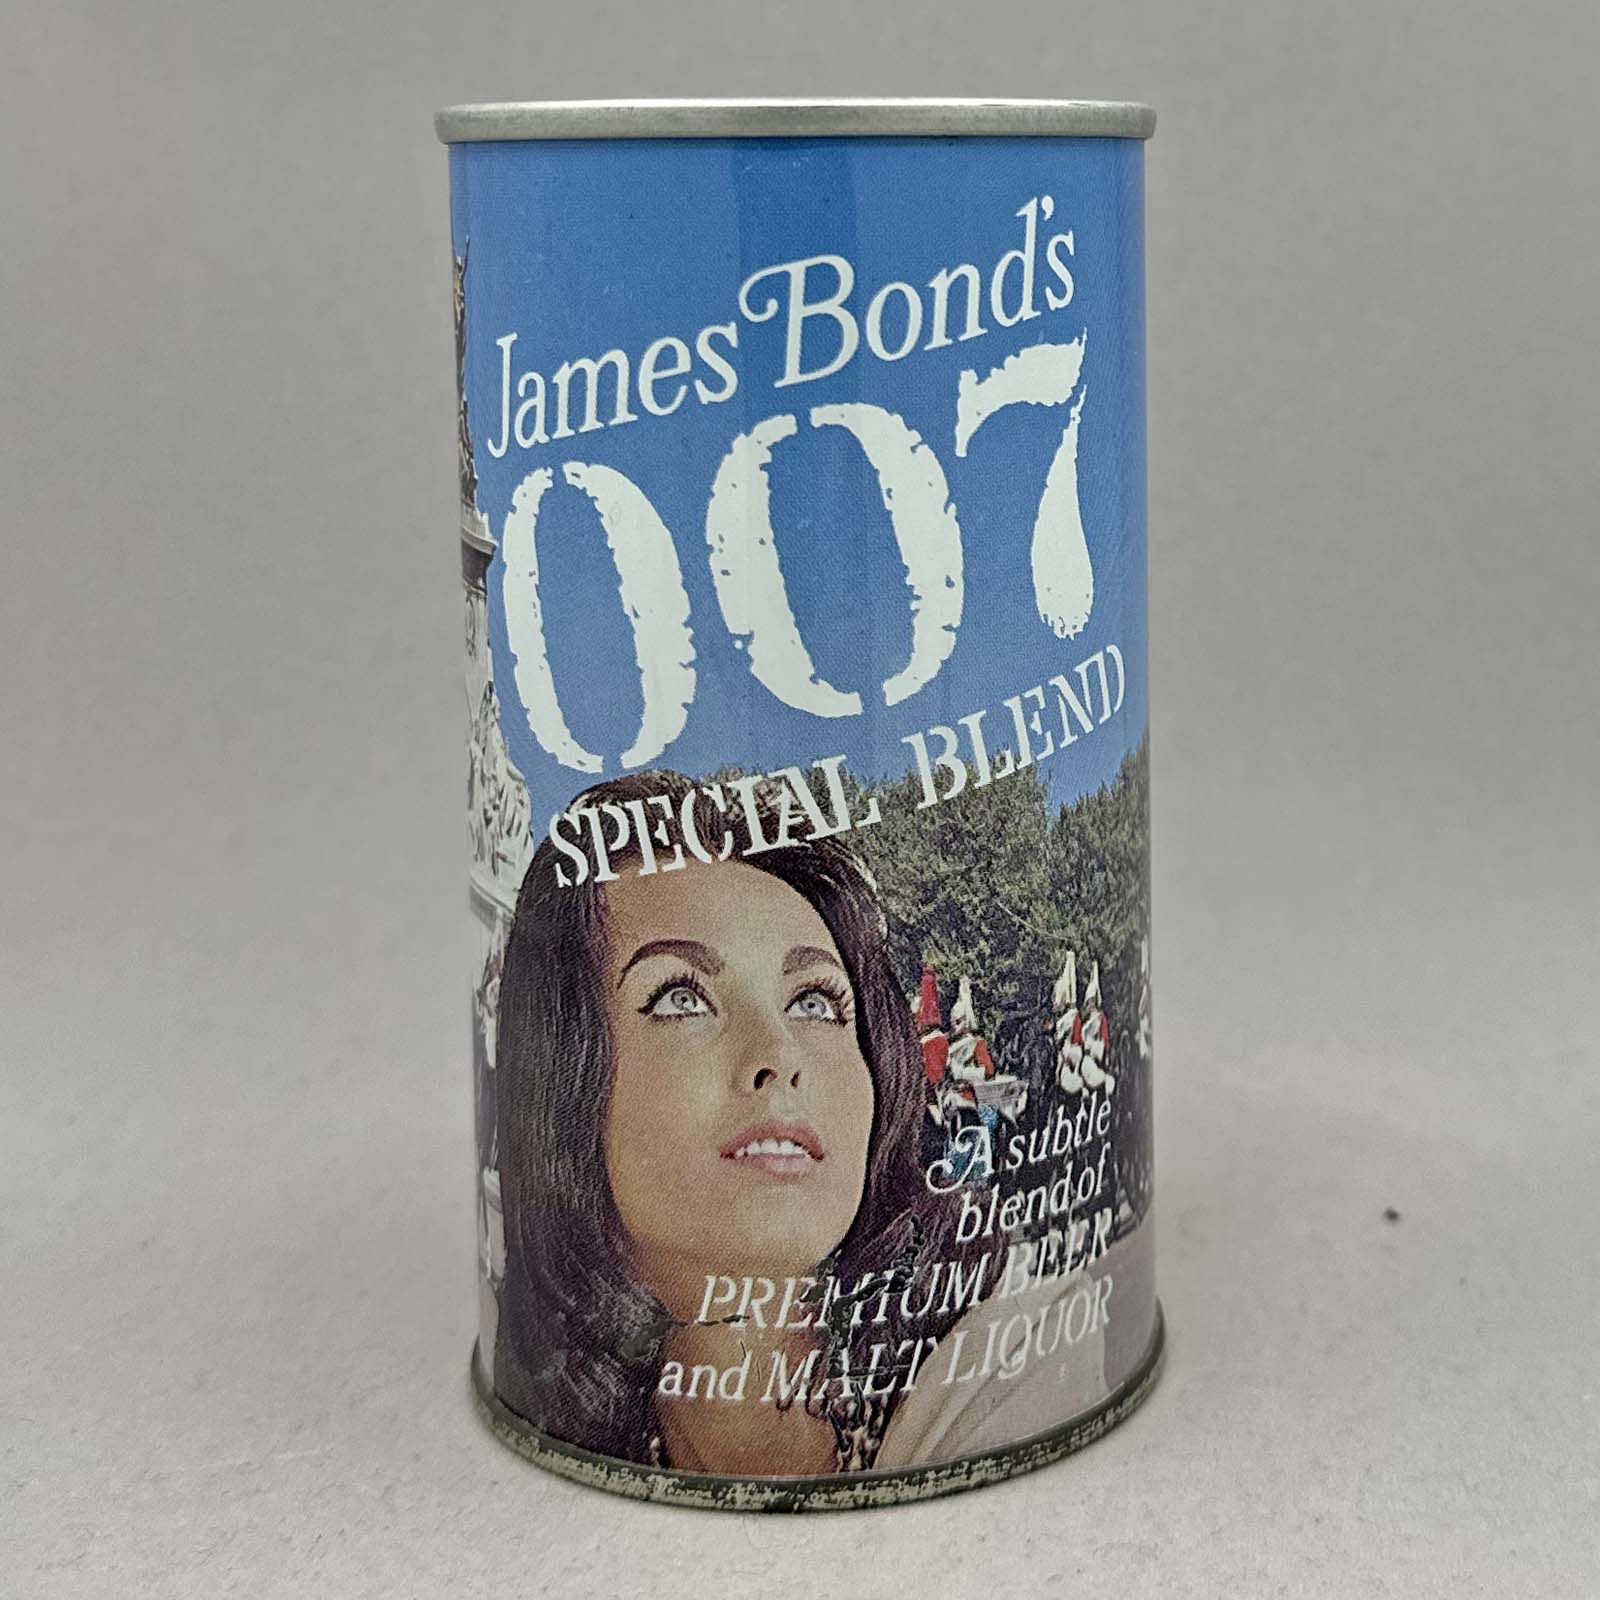 007 82-33 pull tab beer can 1